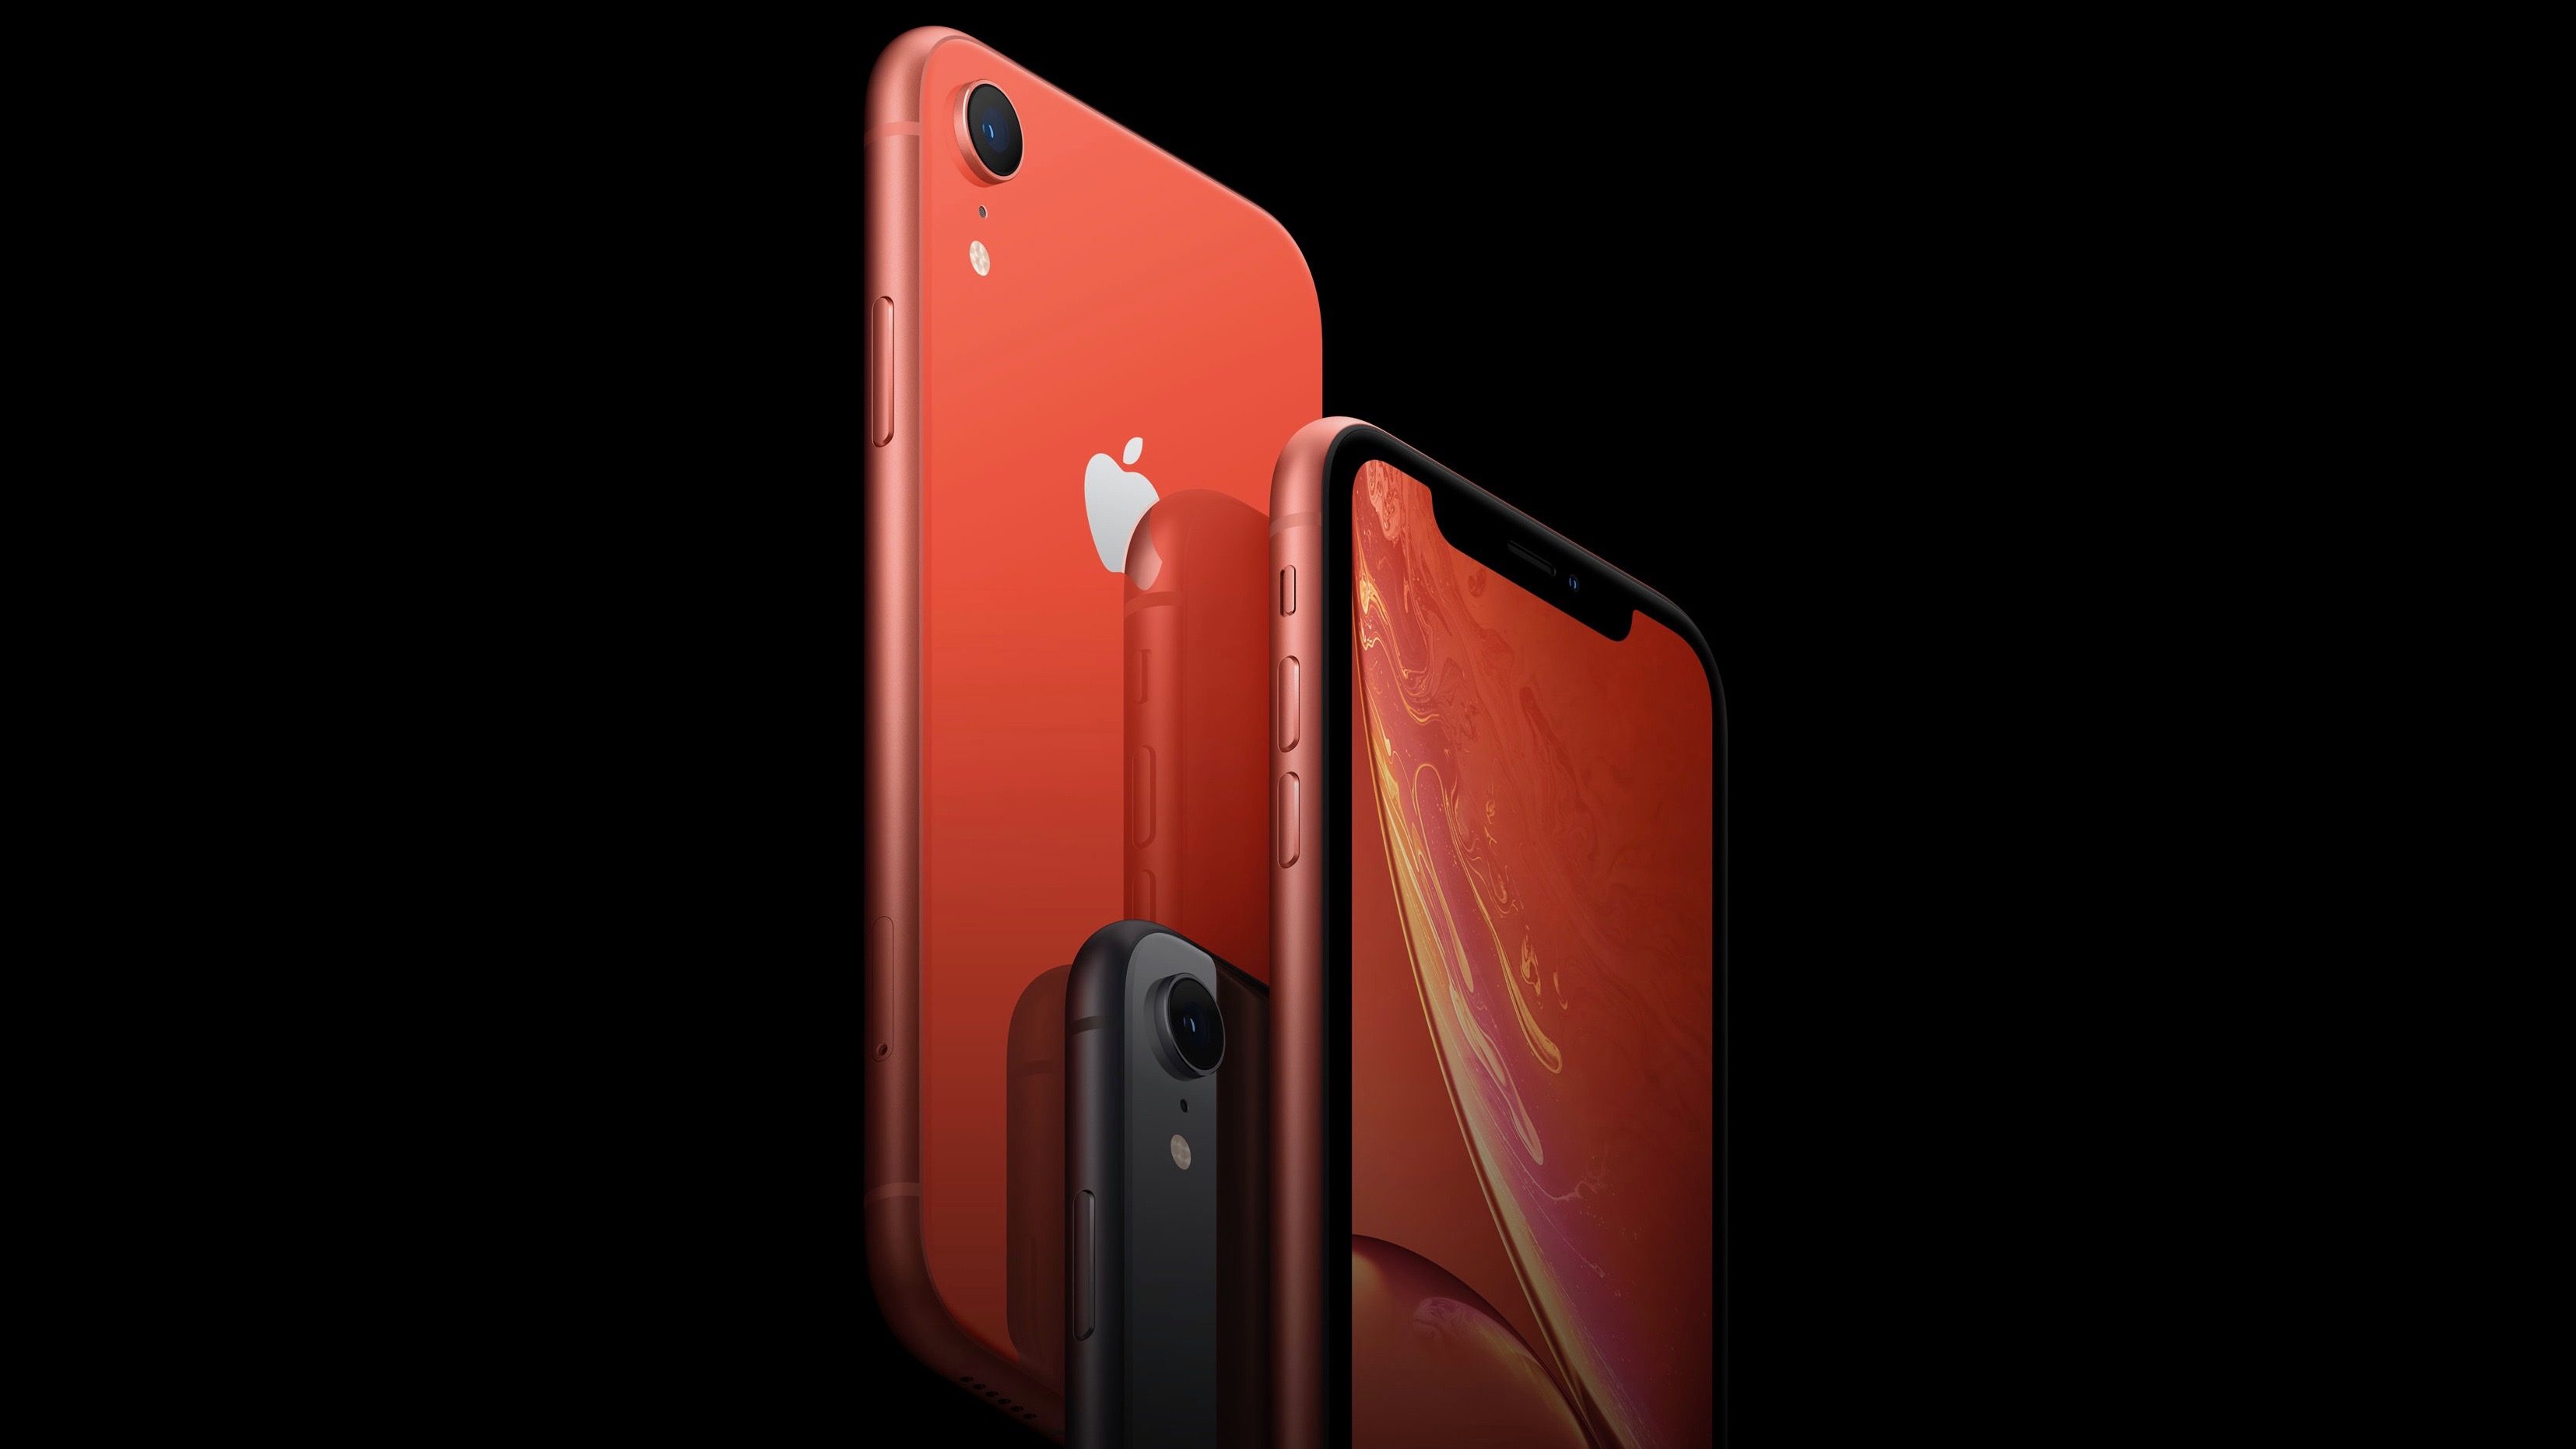 Pre-orders for iPhone XR Starting Today